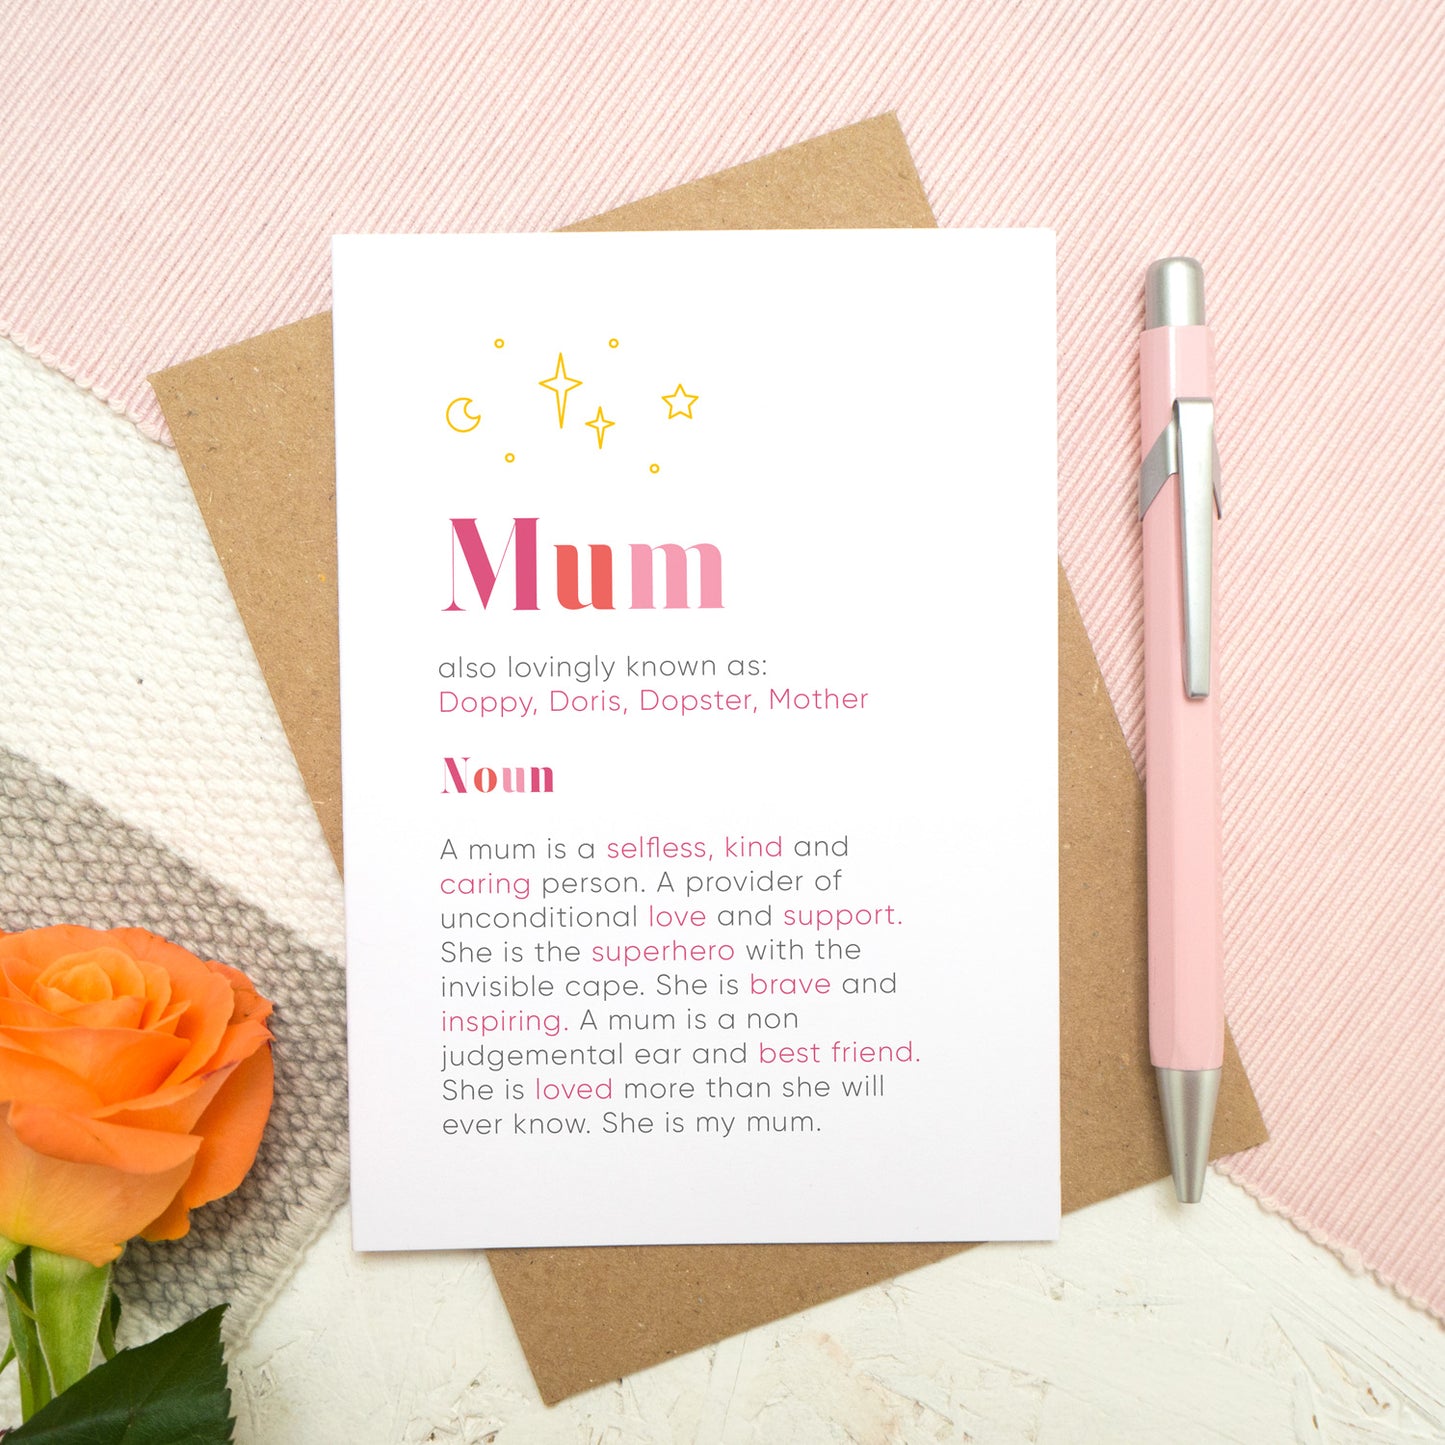 A personalised mum dictionary definition card by Joanne Hawker featuring personalised nicknames and a definition tailored to your mum!